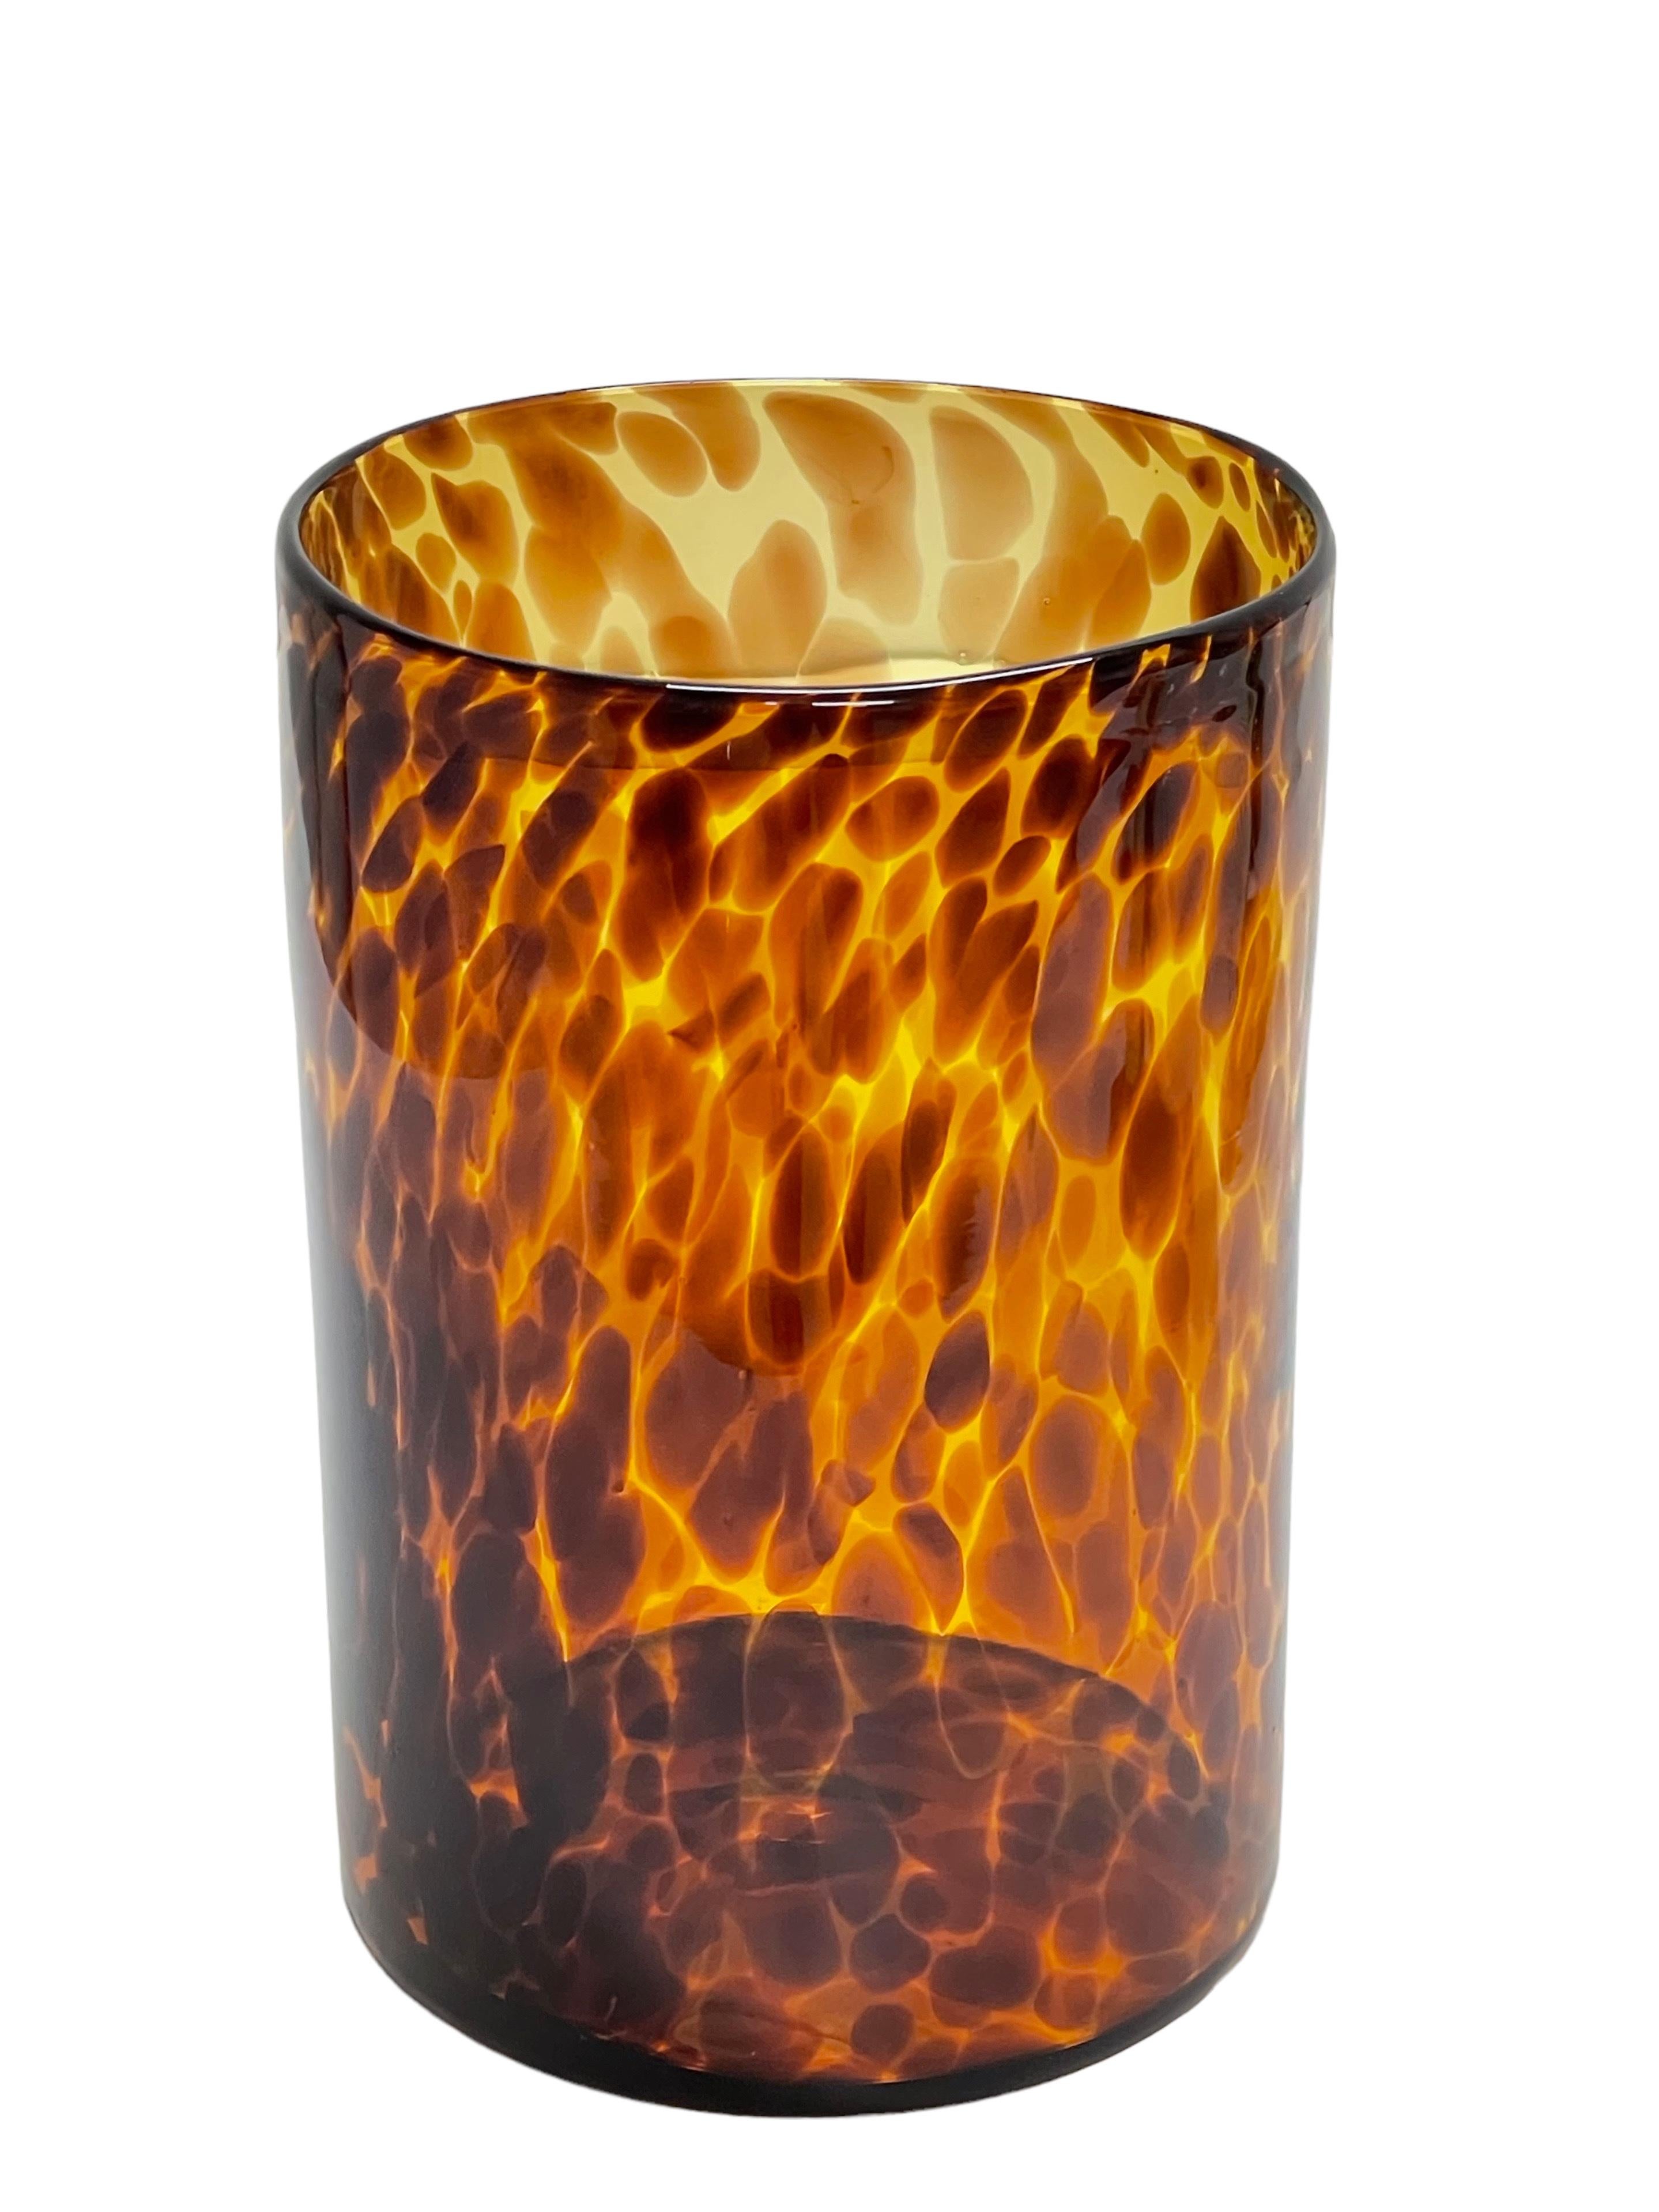 Amazing midcentury large orange and brown leopard glass artistic vase. This incredible piece was designed in Italy during the 1980s.

This item is amazing as it has a wonderful pattern, recalling the classing and evergreen leopard skin. The